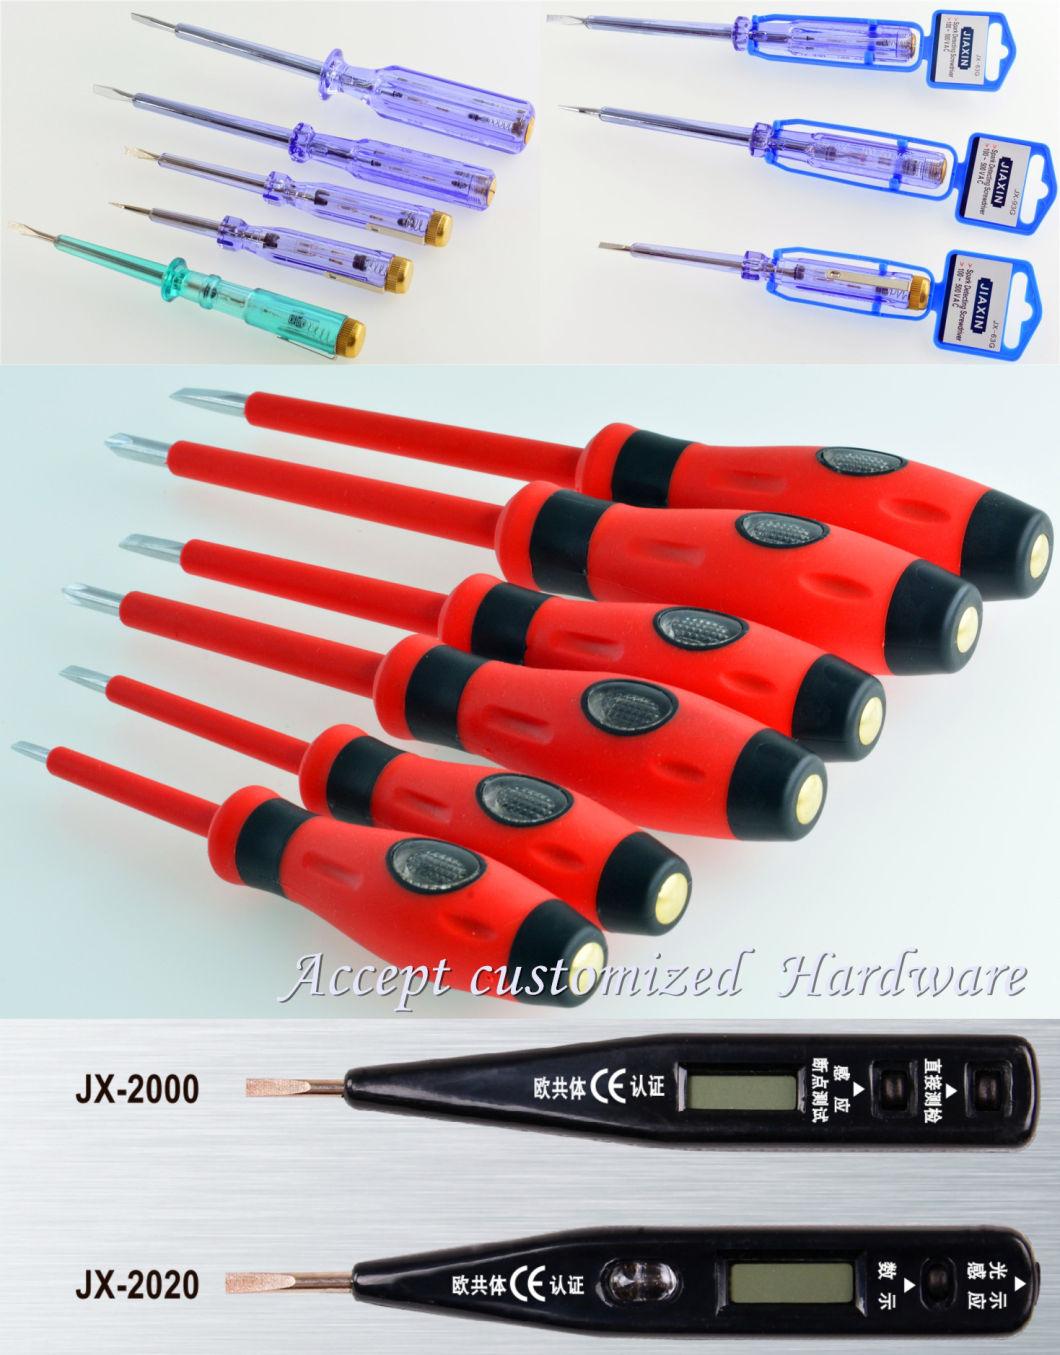 International Universal Multifunctional Test Pen with High Quality and High Torque Insulation Screwdriver Set